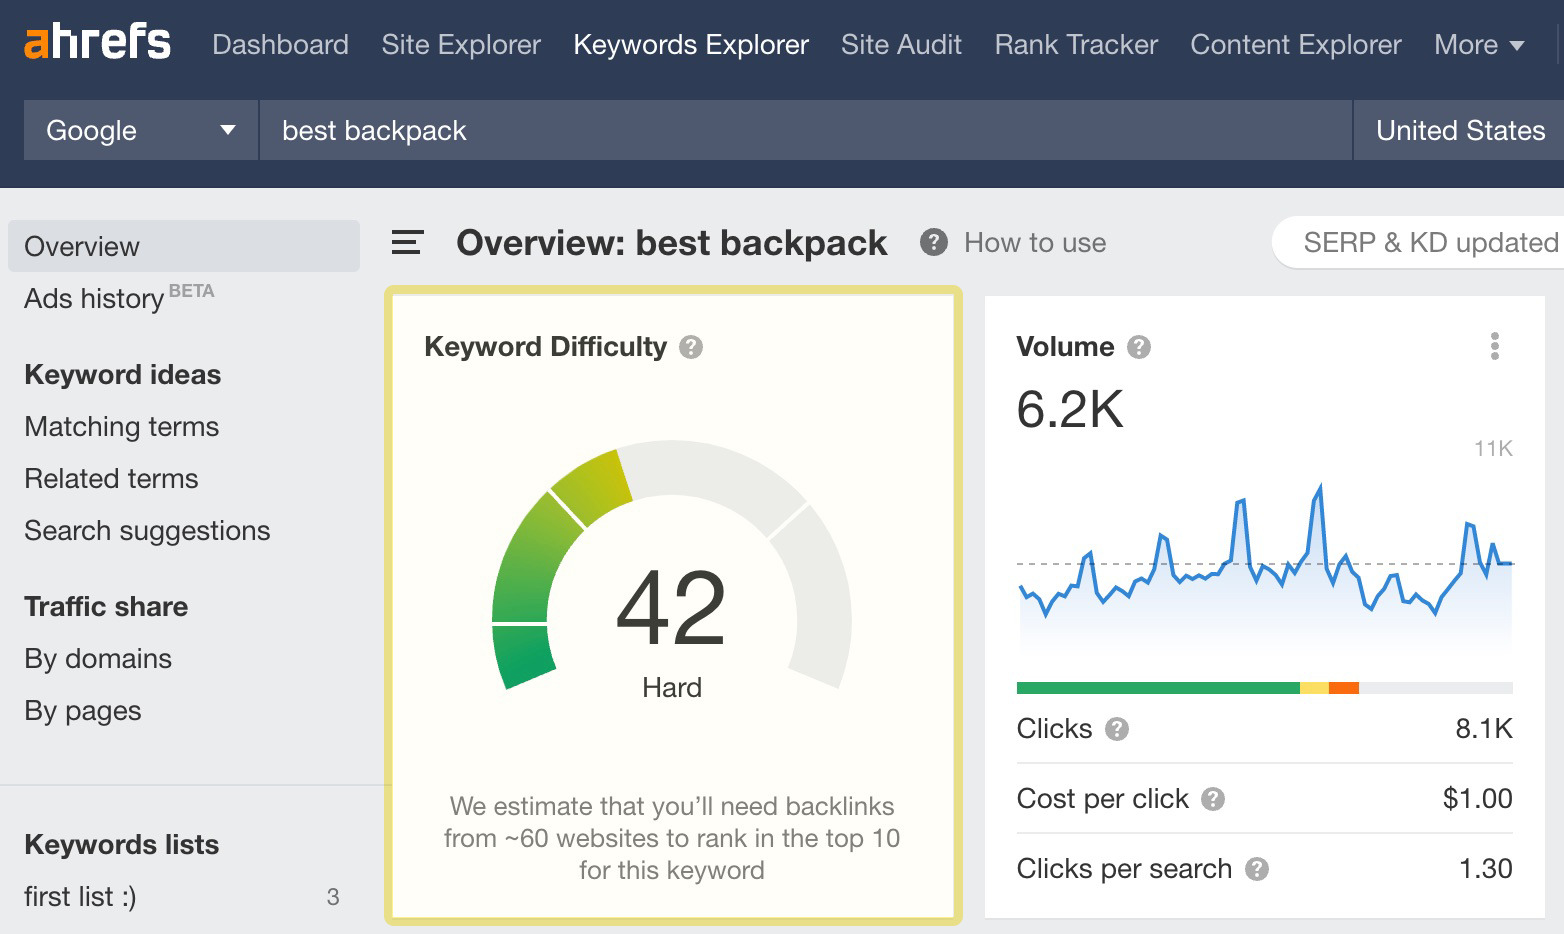 Keywords Explorer overview of "best backpack," which has a KD of 42